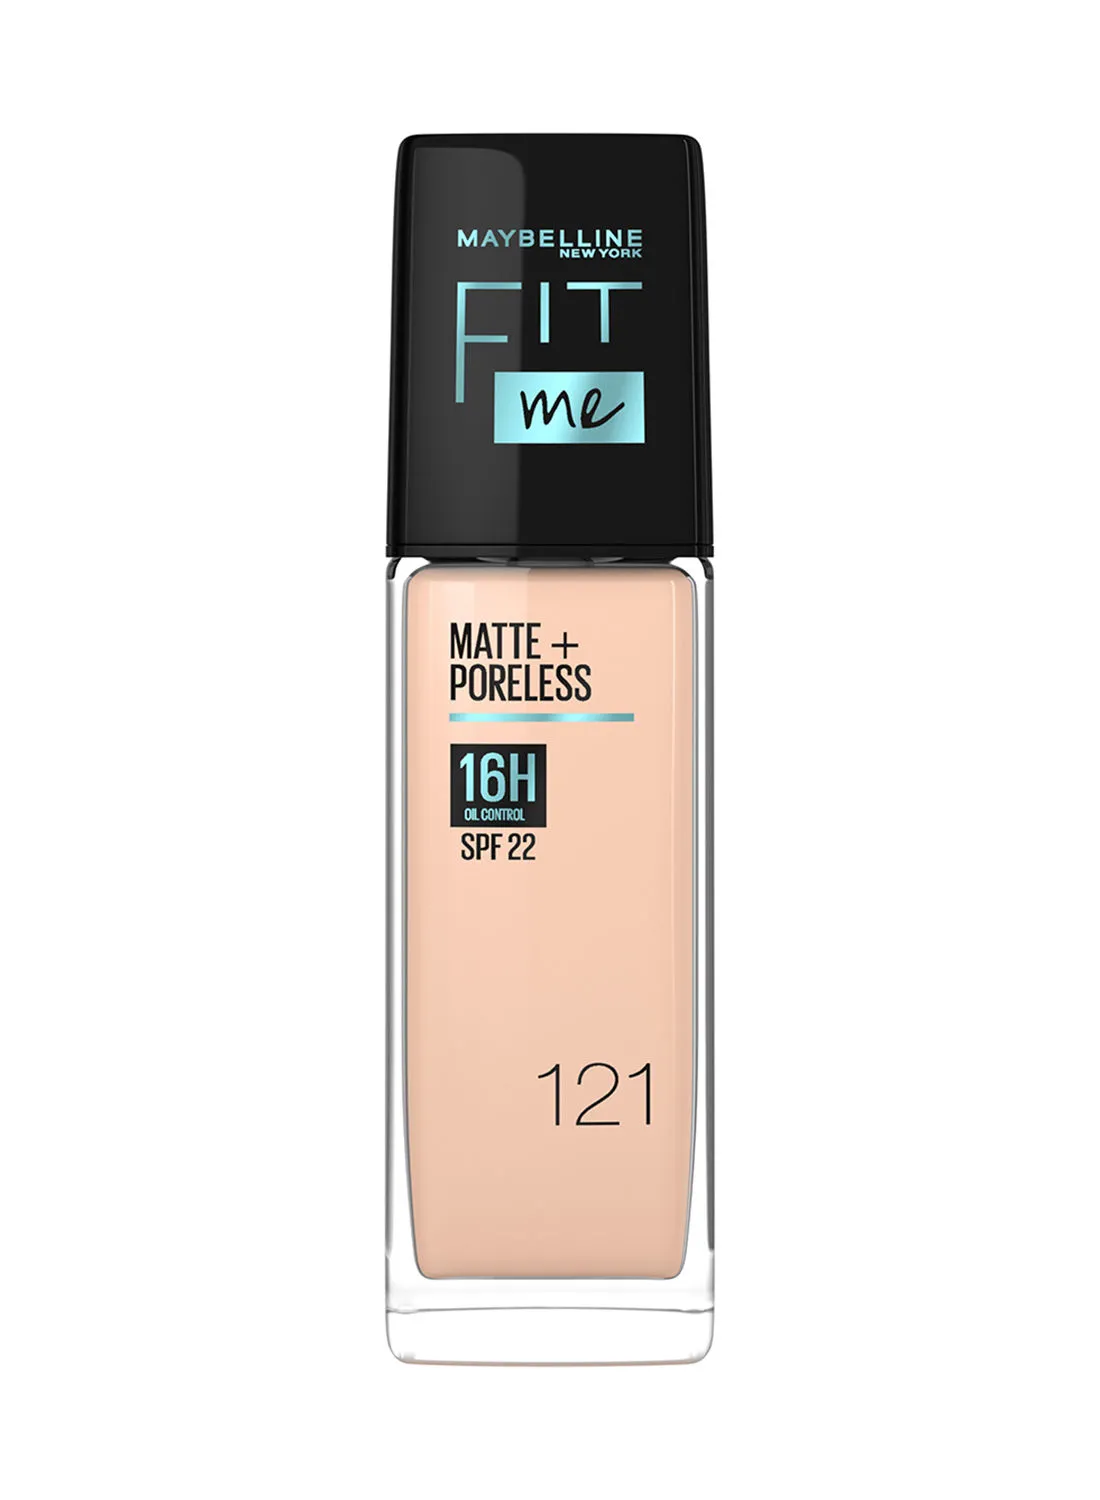 MAYBELLINE NEW YORK Maybelline New York Fit Me Matte & Poreless Foundation 16H Oil Control with SPF 22 - 121